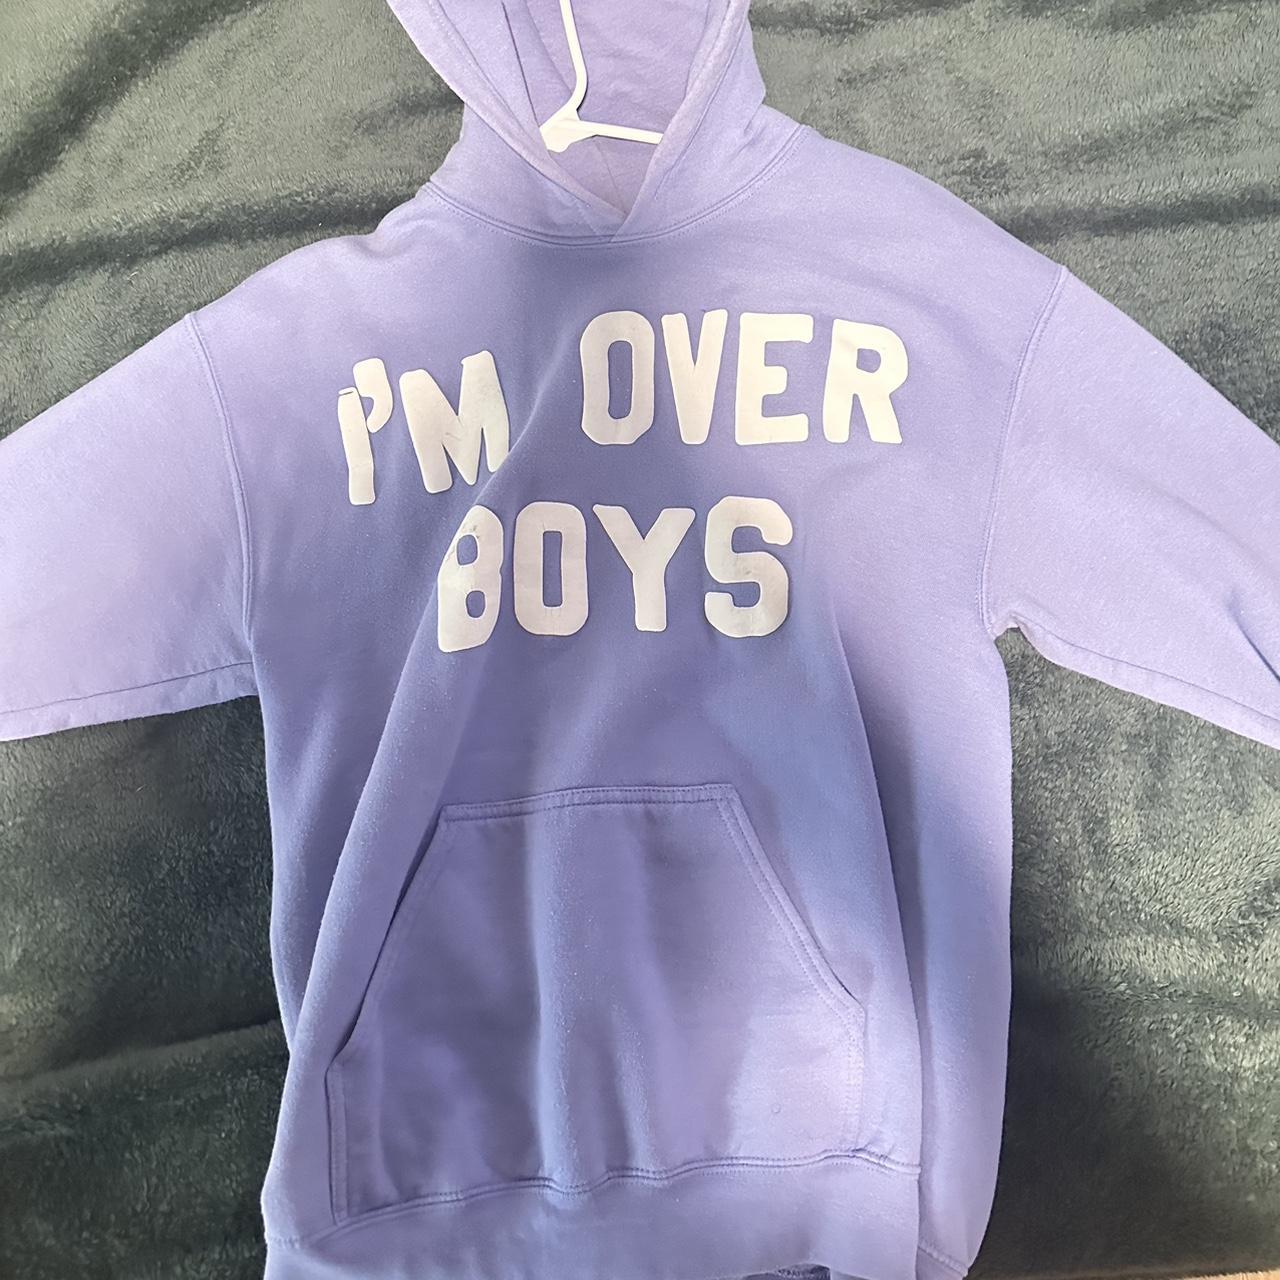 item listed by blondedthriftss